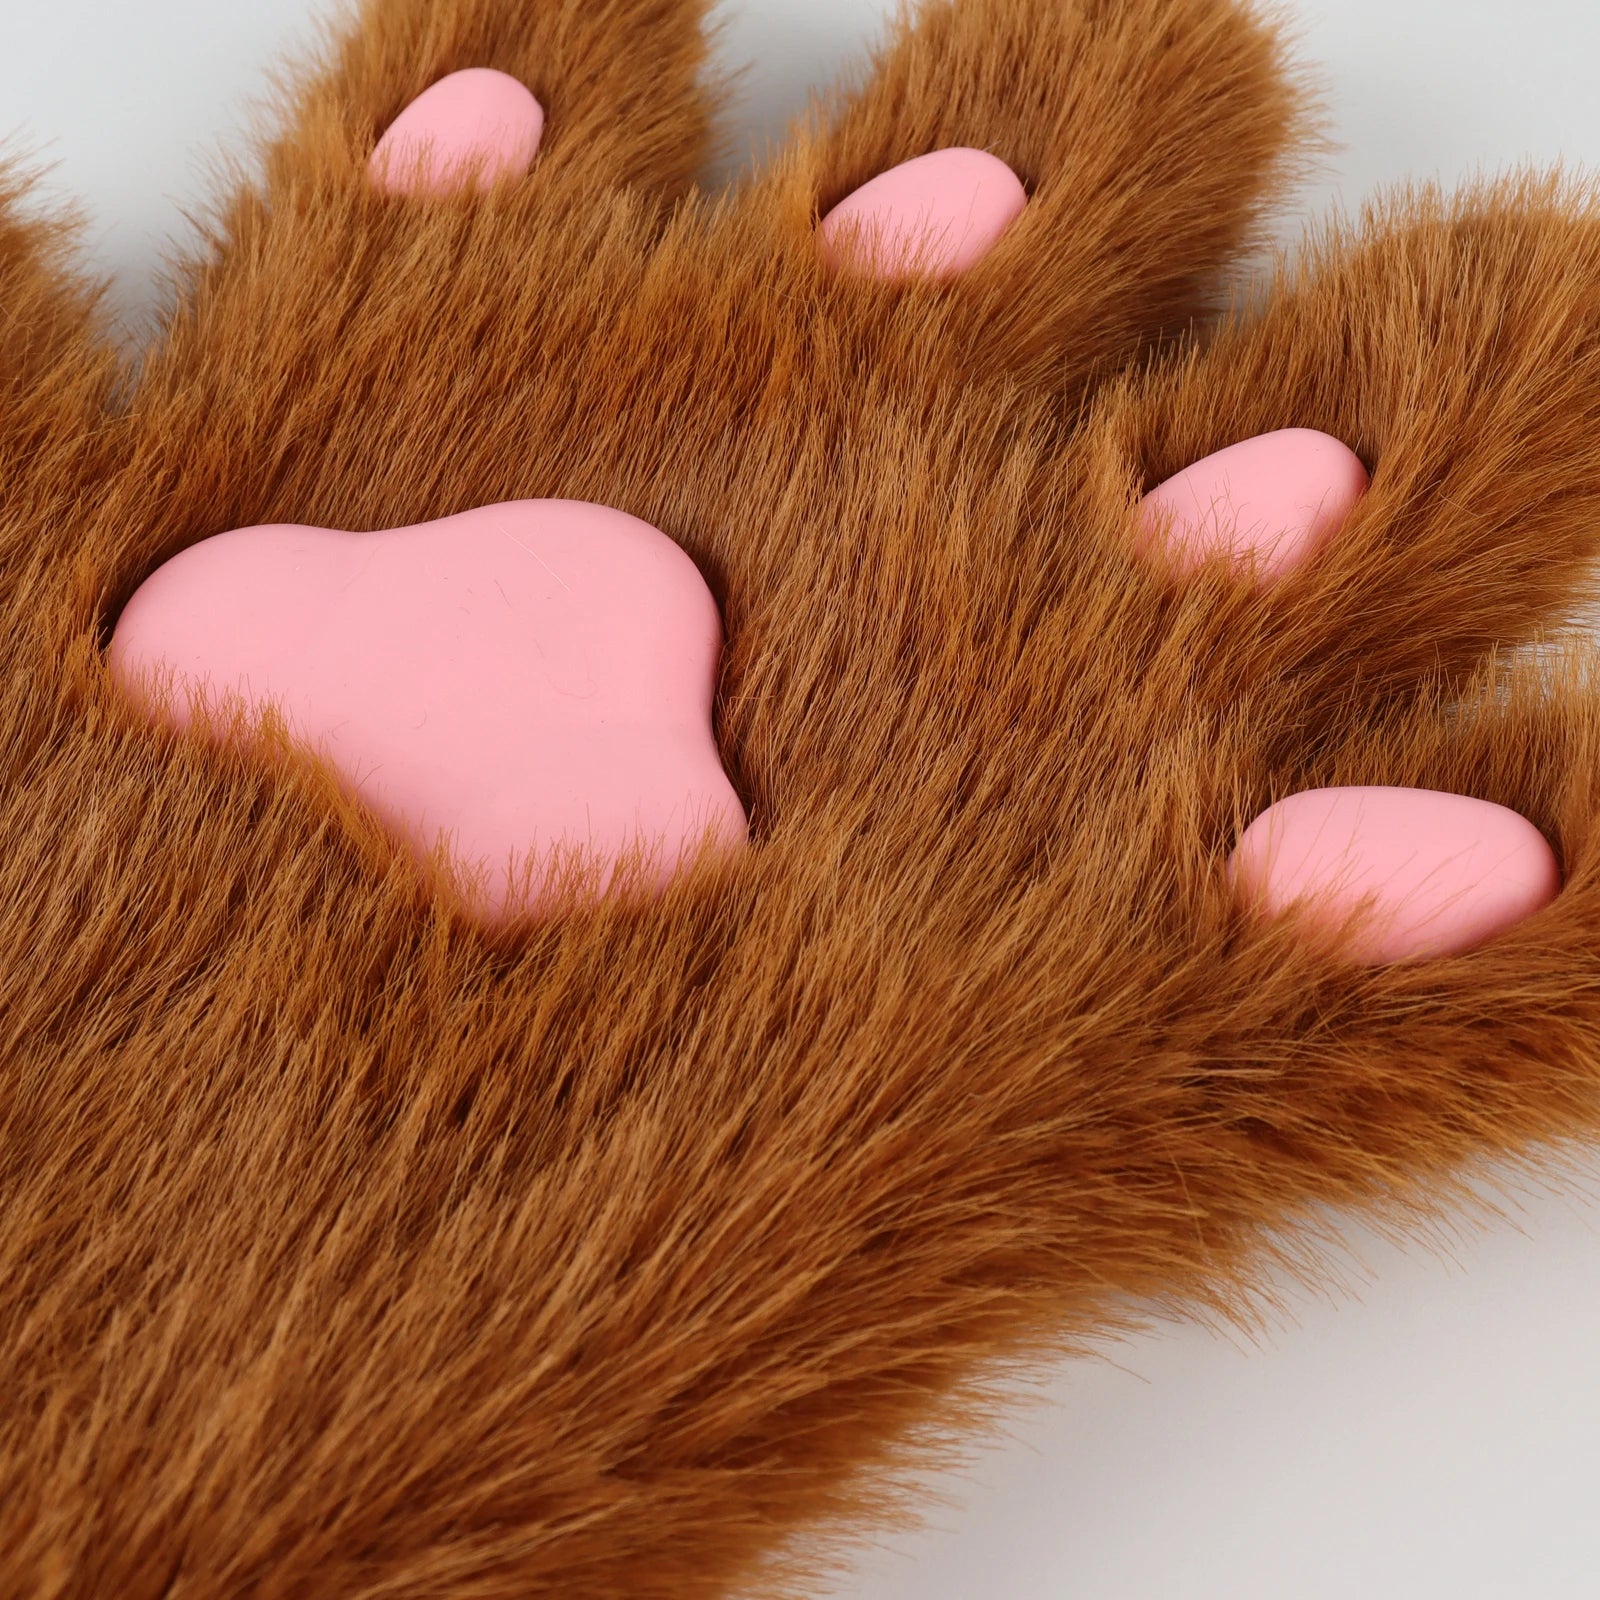 Furry Ears Gloves, Plush Long Tail, and Fluffy Paws Set - Transform into Your Fursona Alter Ego RoboRender